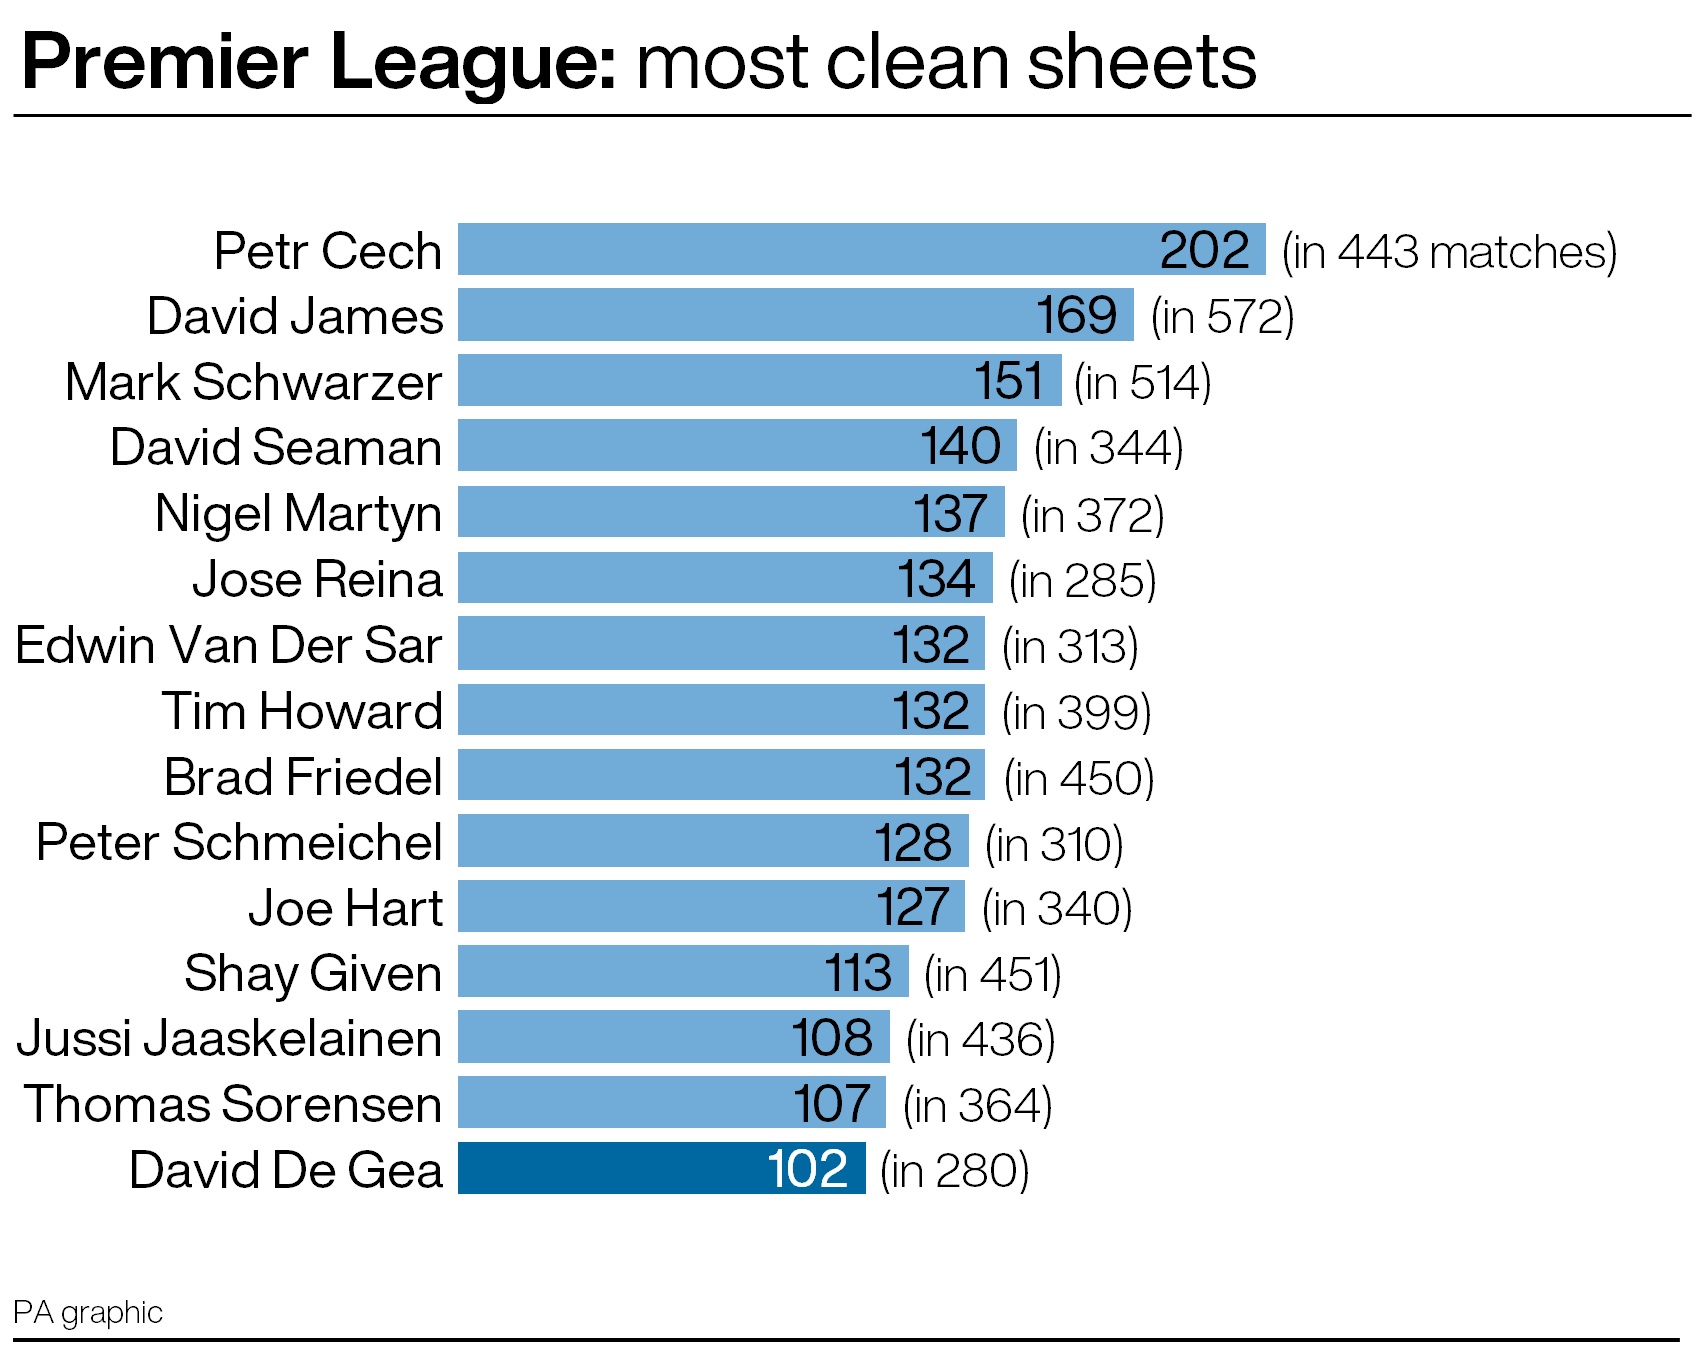 Goalkeepers with most Premier League clean sheets